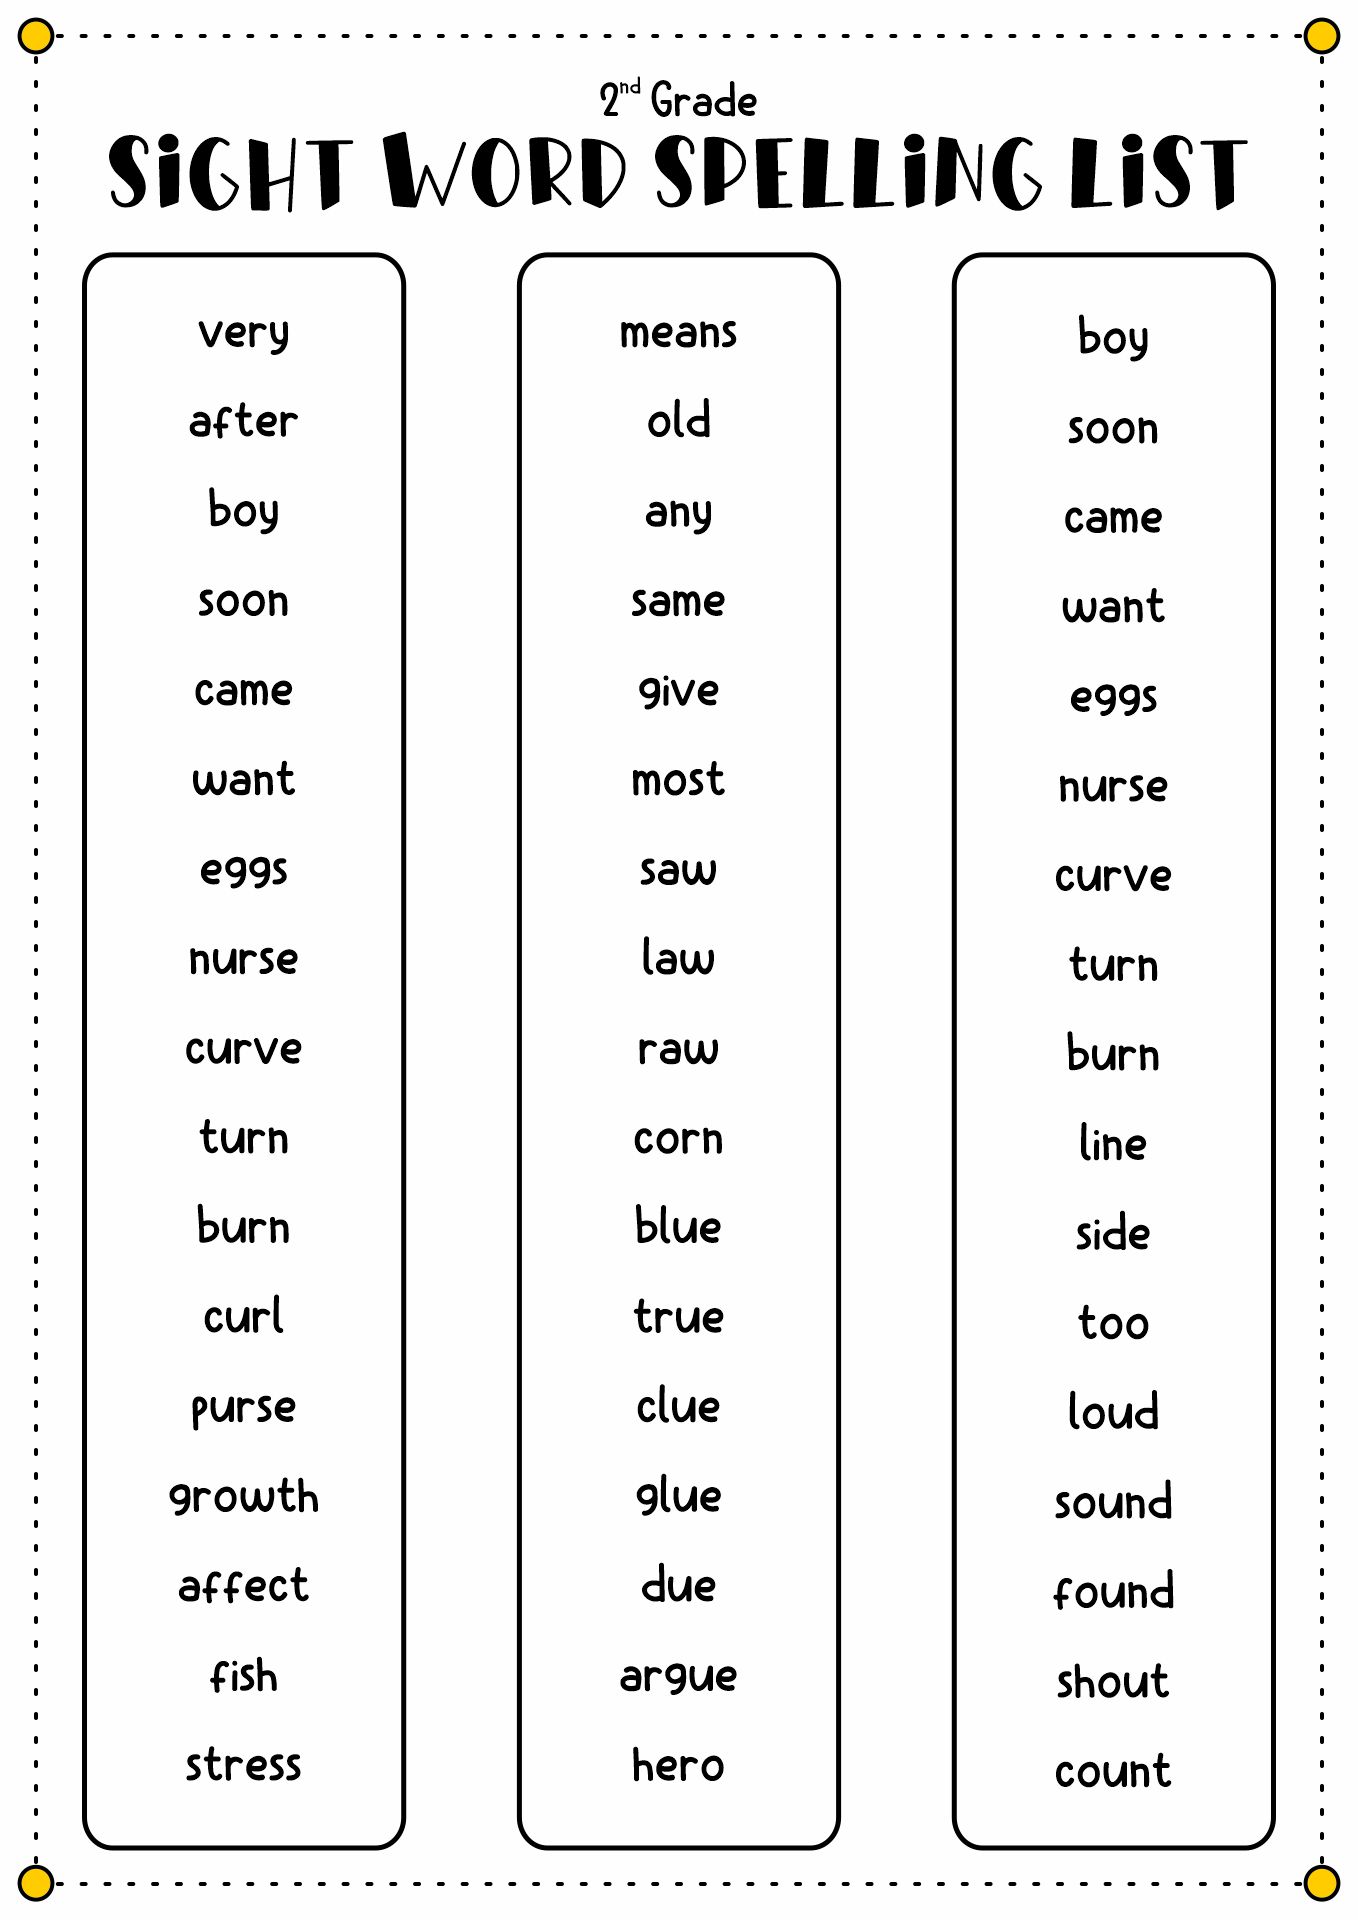 Spelling for 2nd Grade Sight Word List